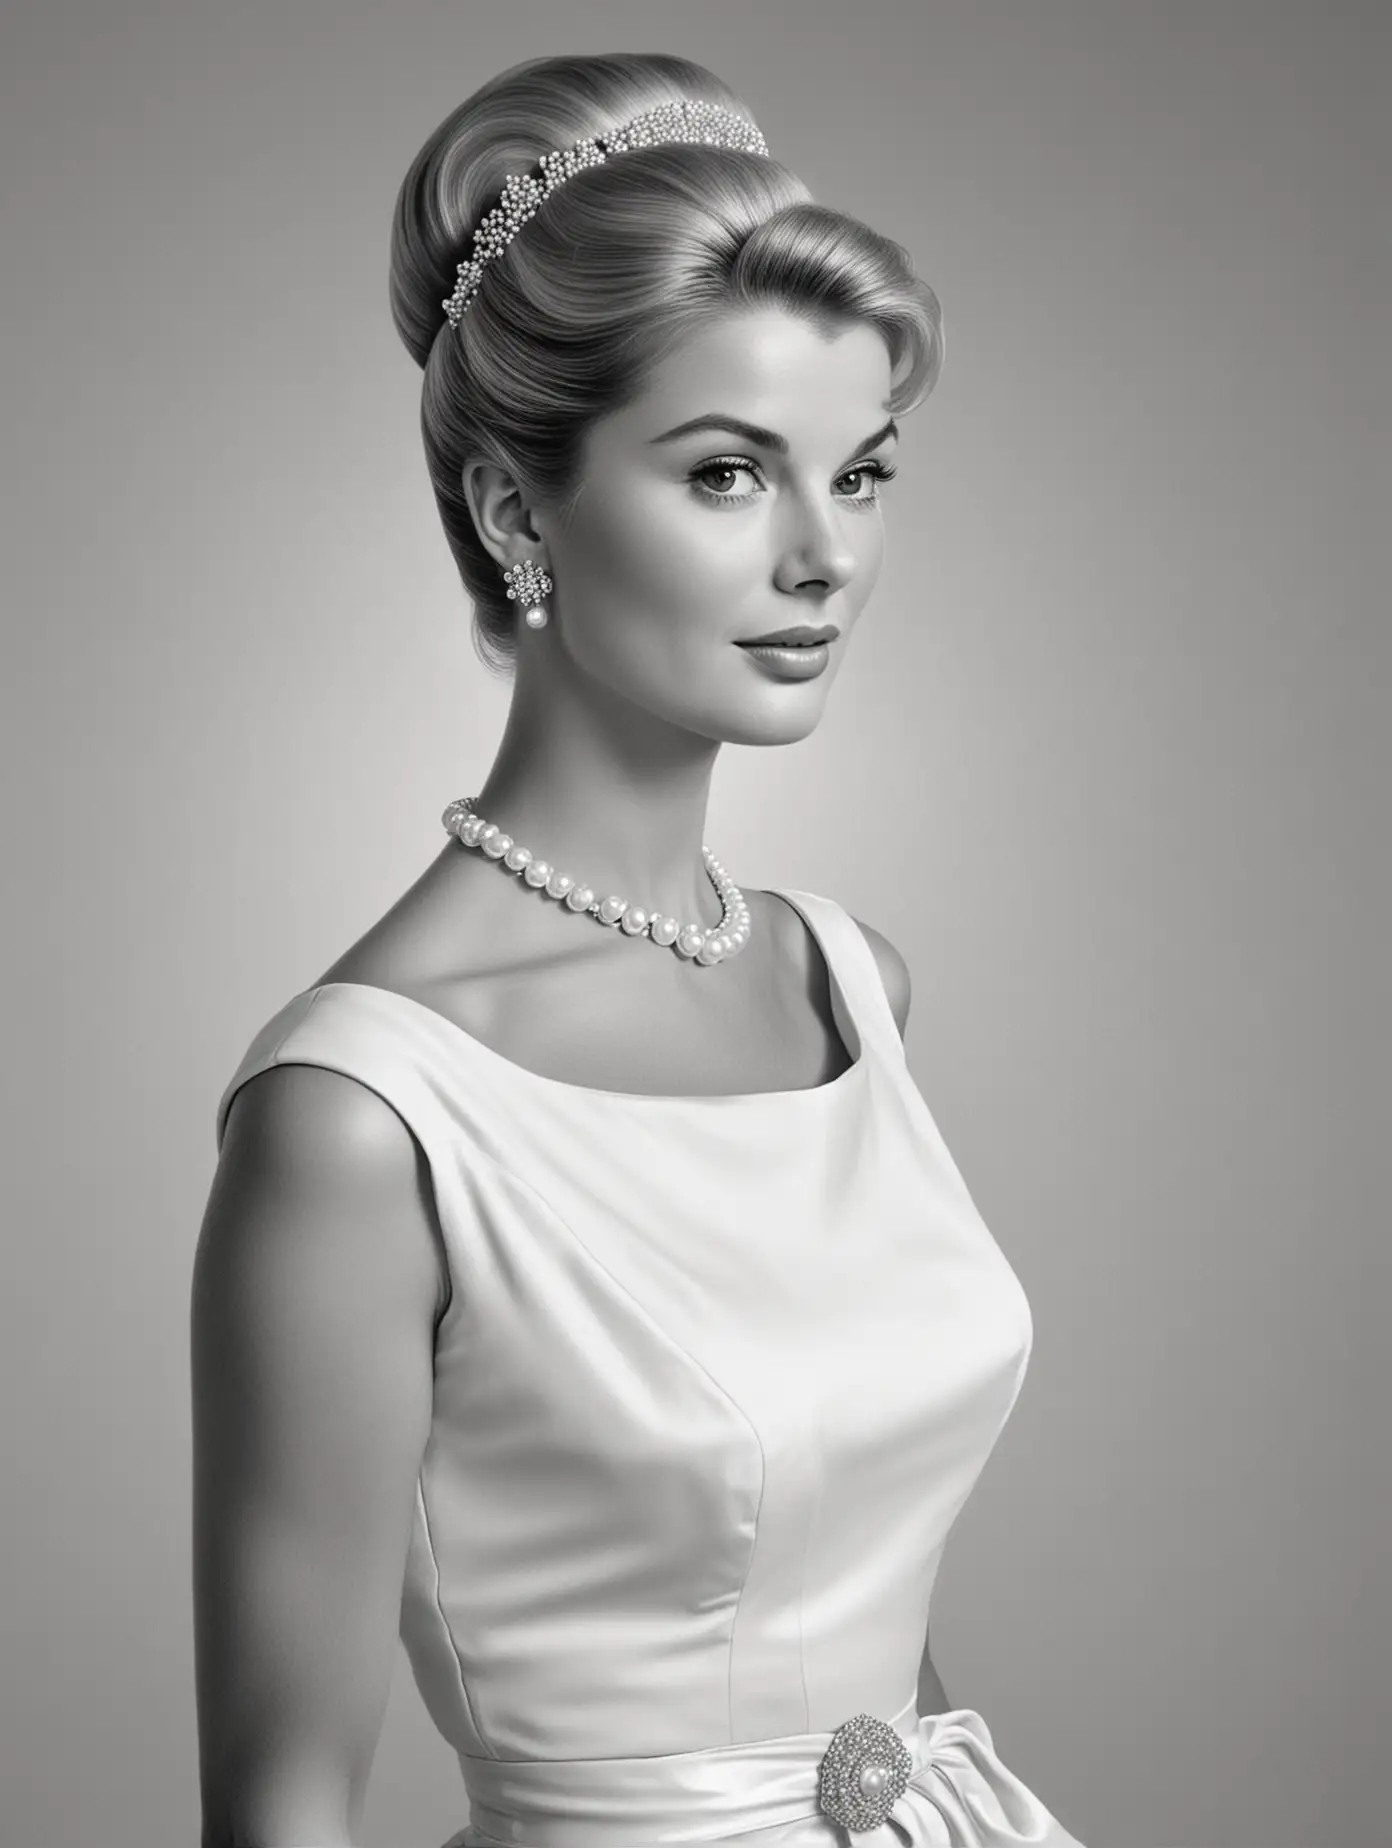 Elegant 1950s Woman in White Dress and Pearls on White Background